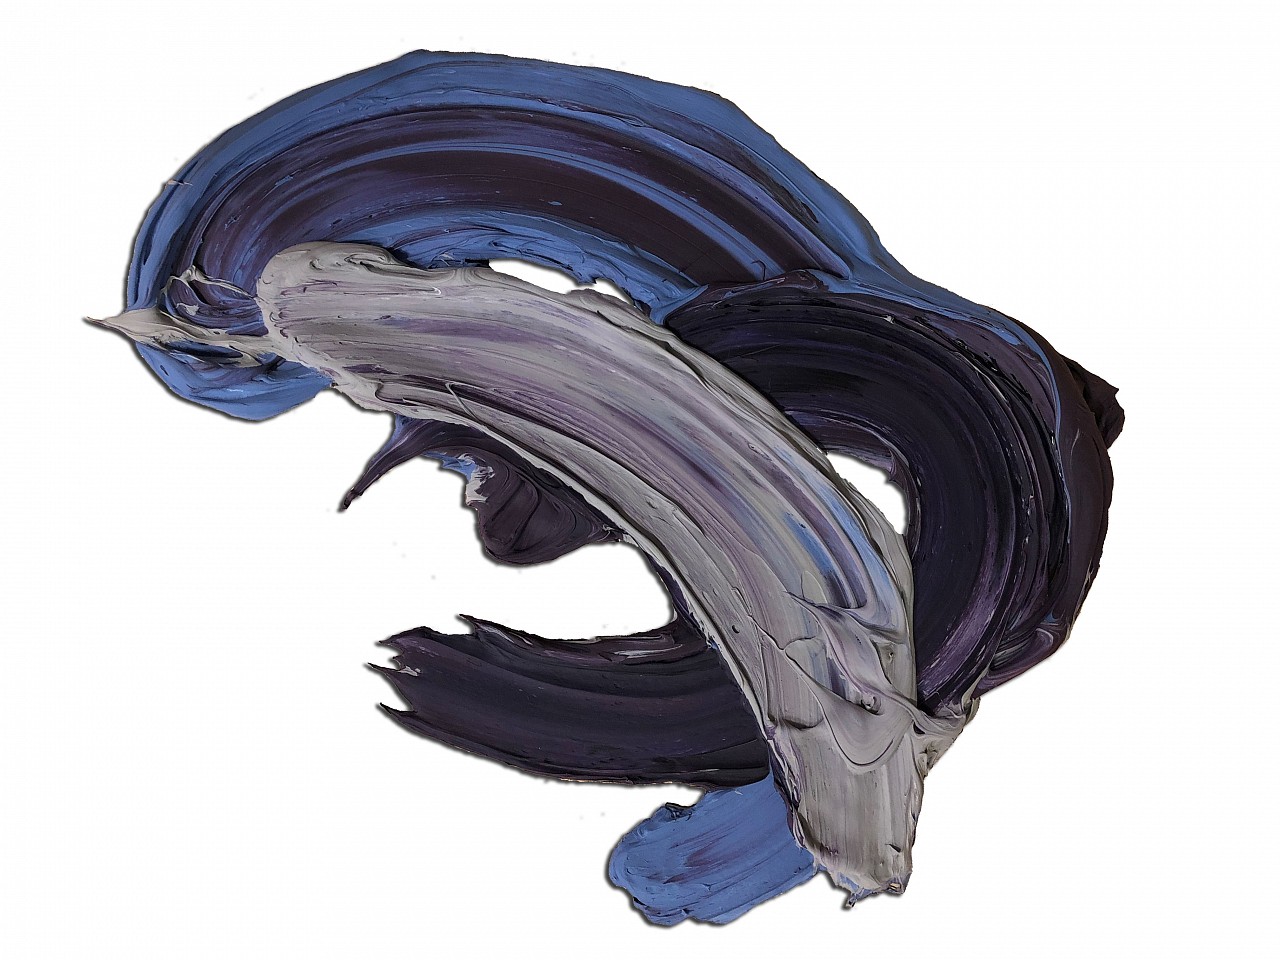 Donald Martiny, Hupa, 2019
polymer and pigment on aluminum, 59 x 48 in.
MART00113